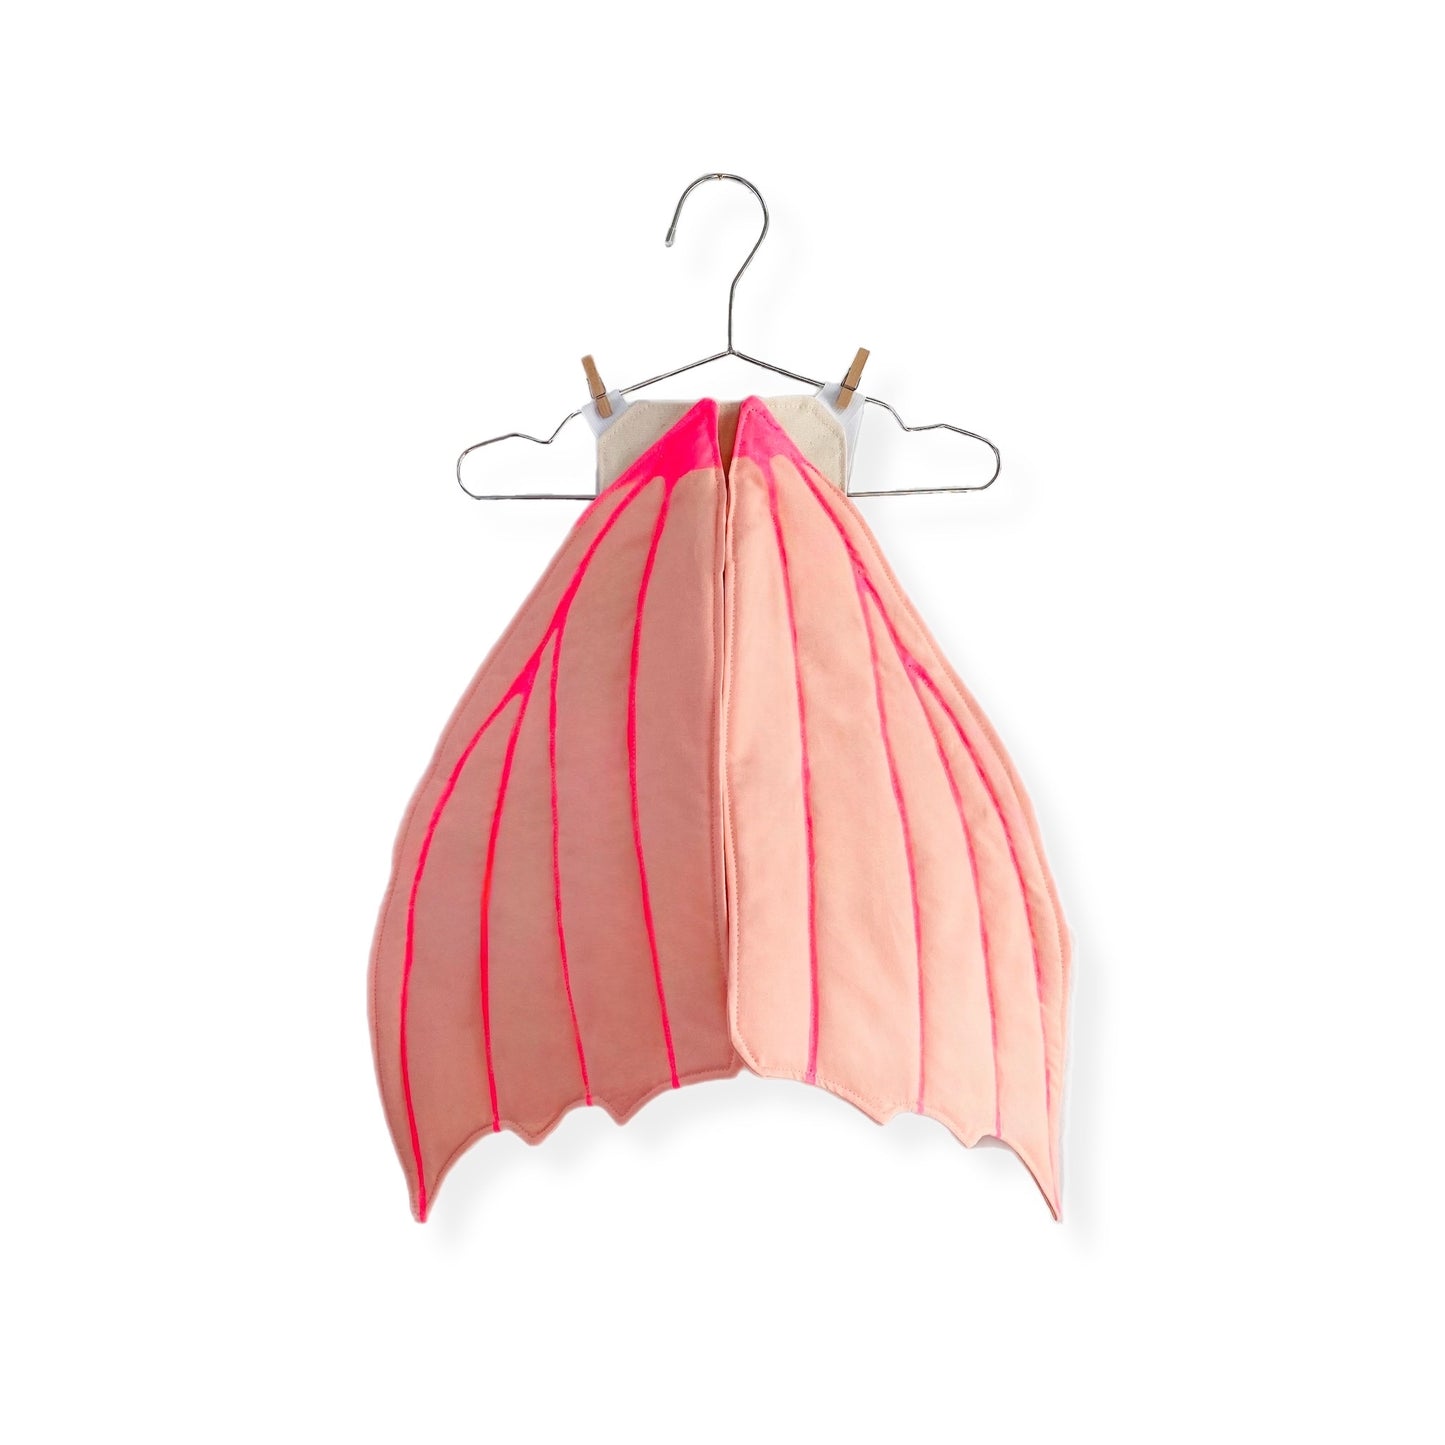 Pink dragon costume wings for kids pretend play and dress up.